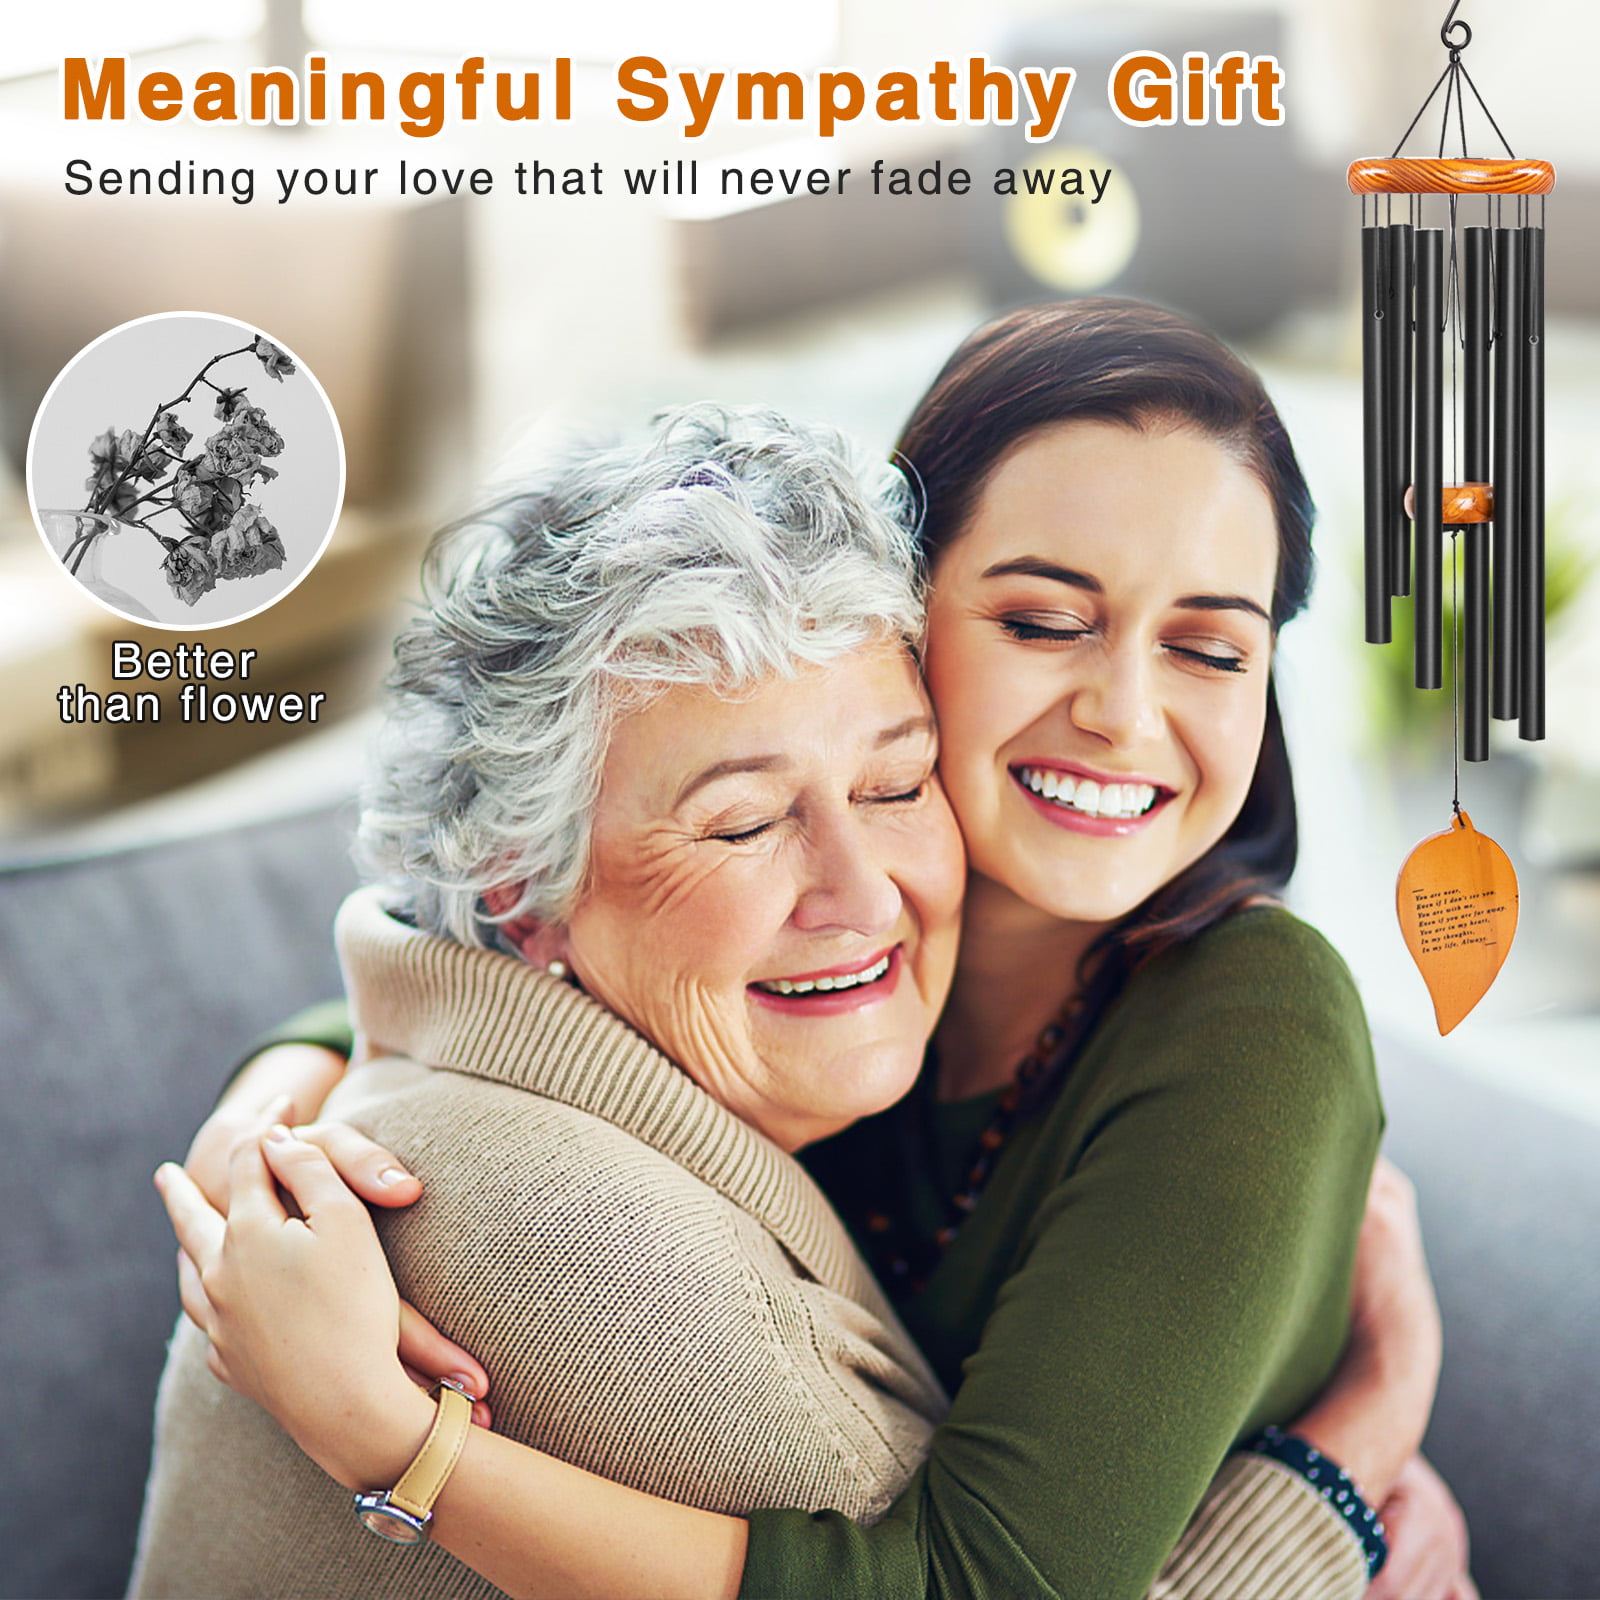 Porch Bereavement Windchimes Courtyard Garden Sympathy Wind Chimes Metal Outdoors/Indoors Wind Chimes Gifts for Patio ARIZIN 32'' Memorial Wind Chimes for Loss of Loved One Prime 